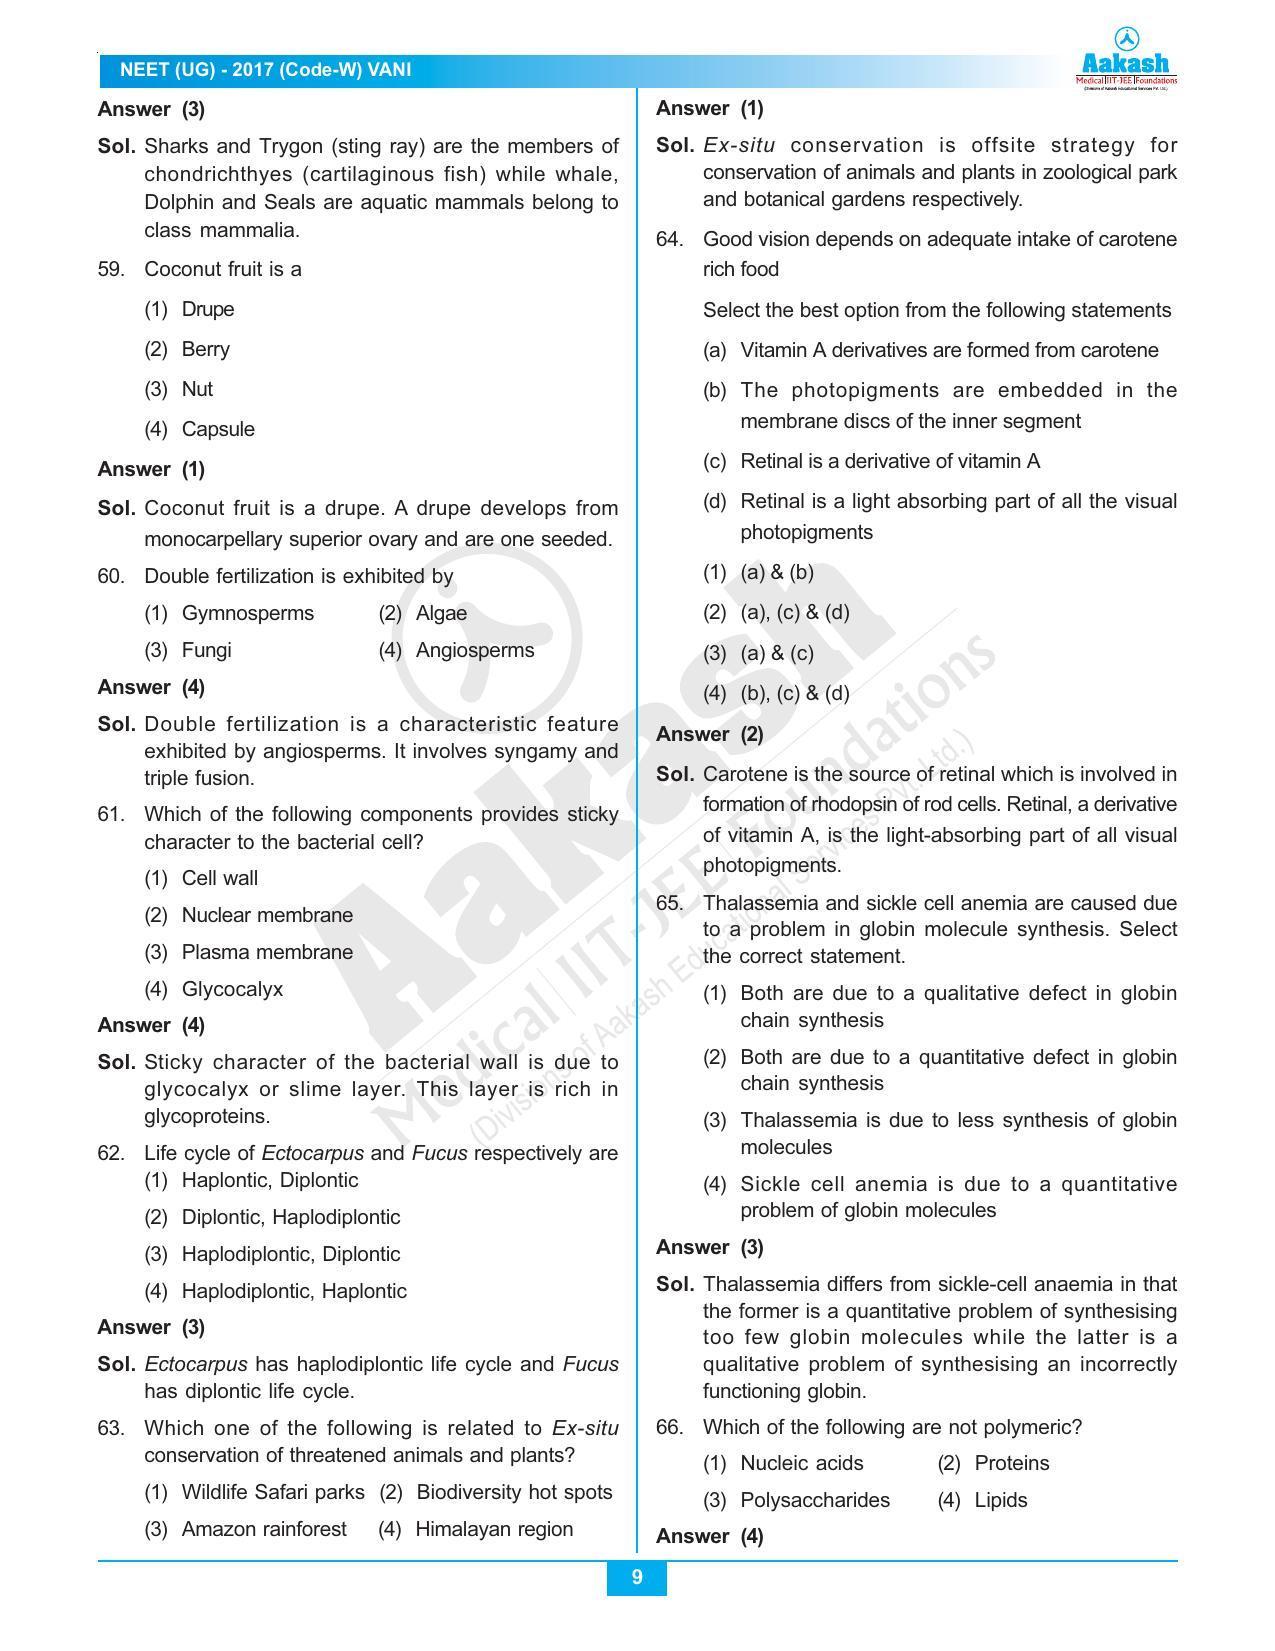  NEET Code W 2017 Answer & Solutions - Page 9